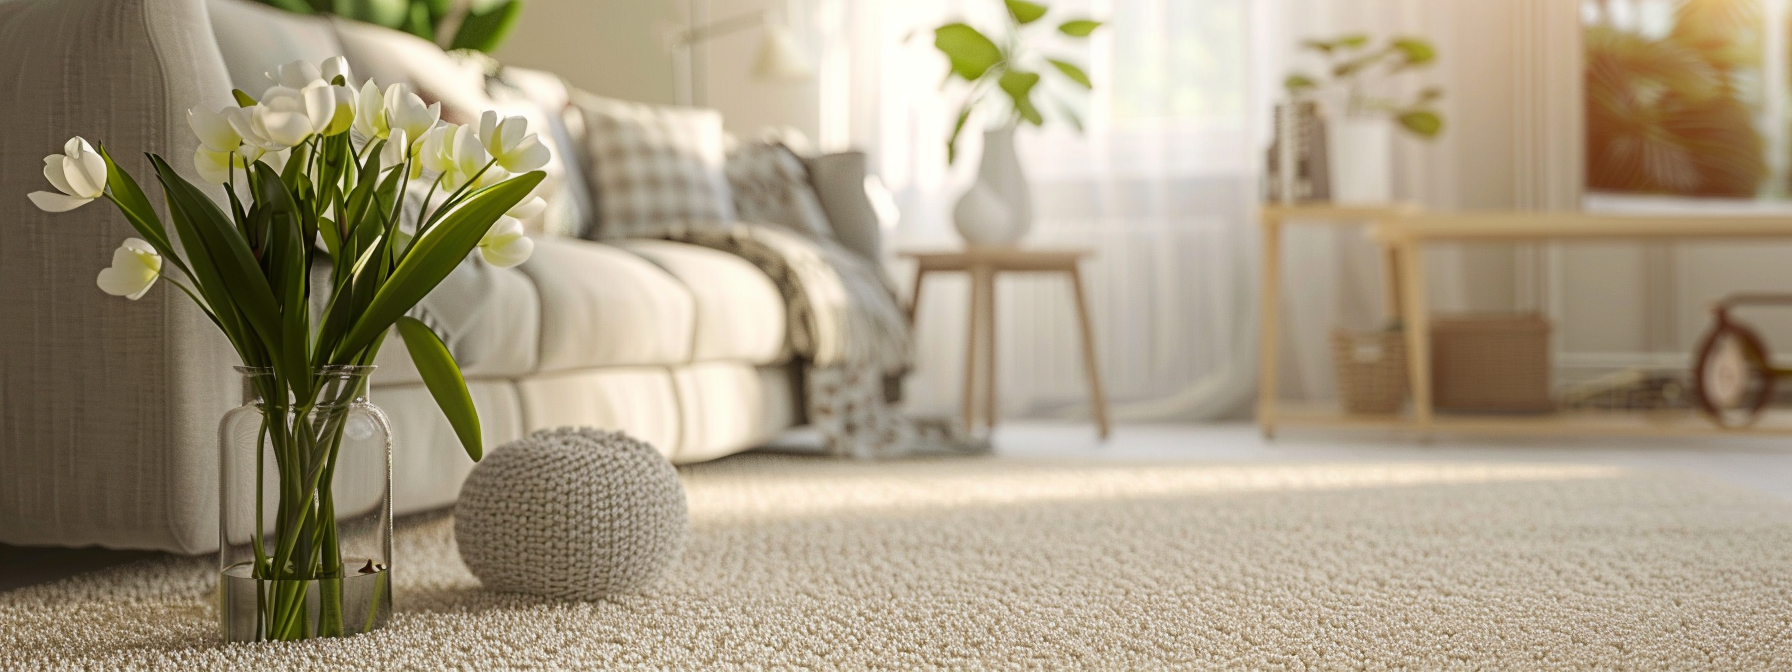 Mastering Carpet Vacuuming: Techniques, Schedules, and the Best Vacuums